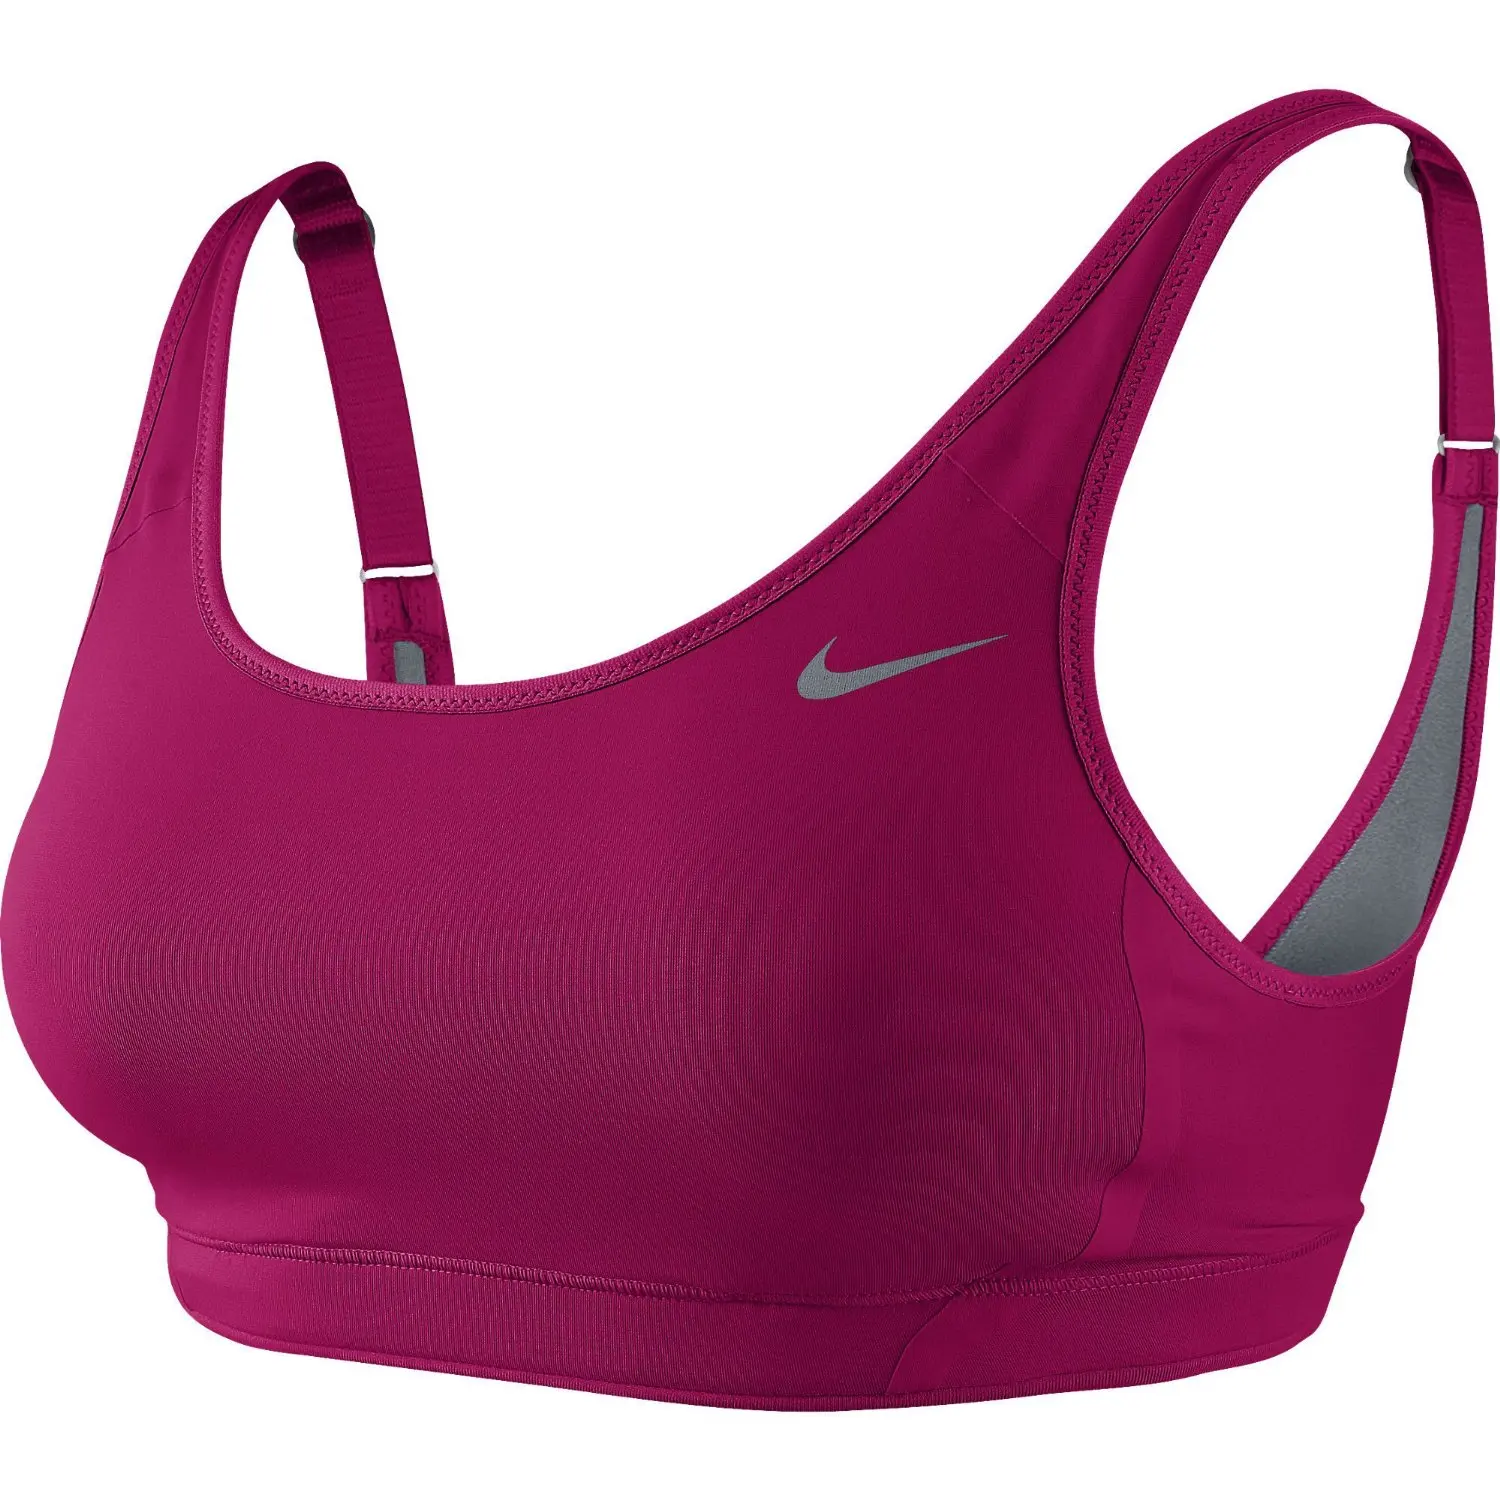 Cheap Nike Sports Top, find Nike Sports Top deals on line at Alibaba.com